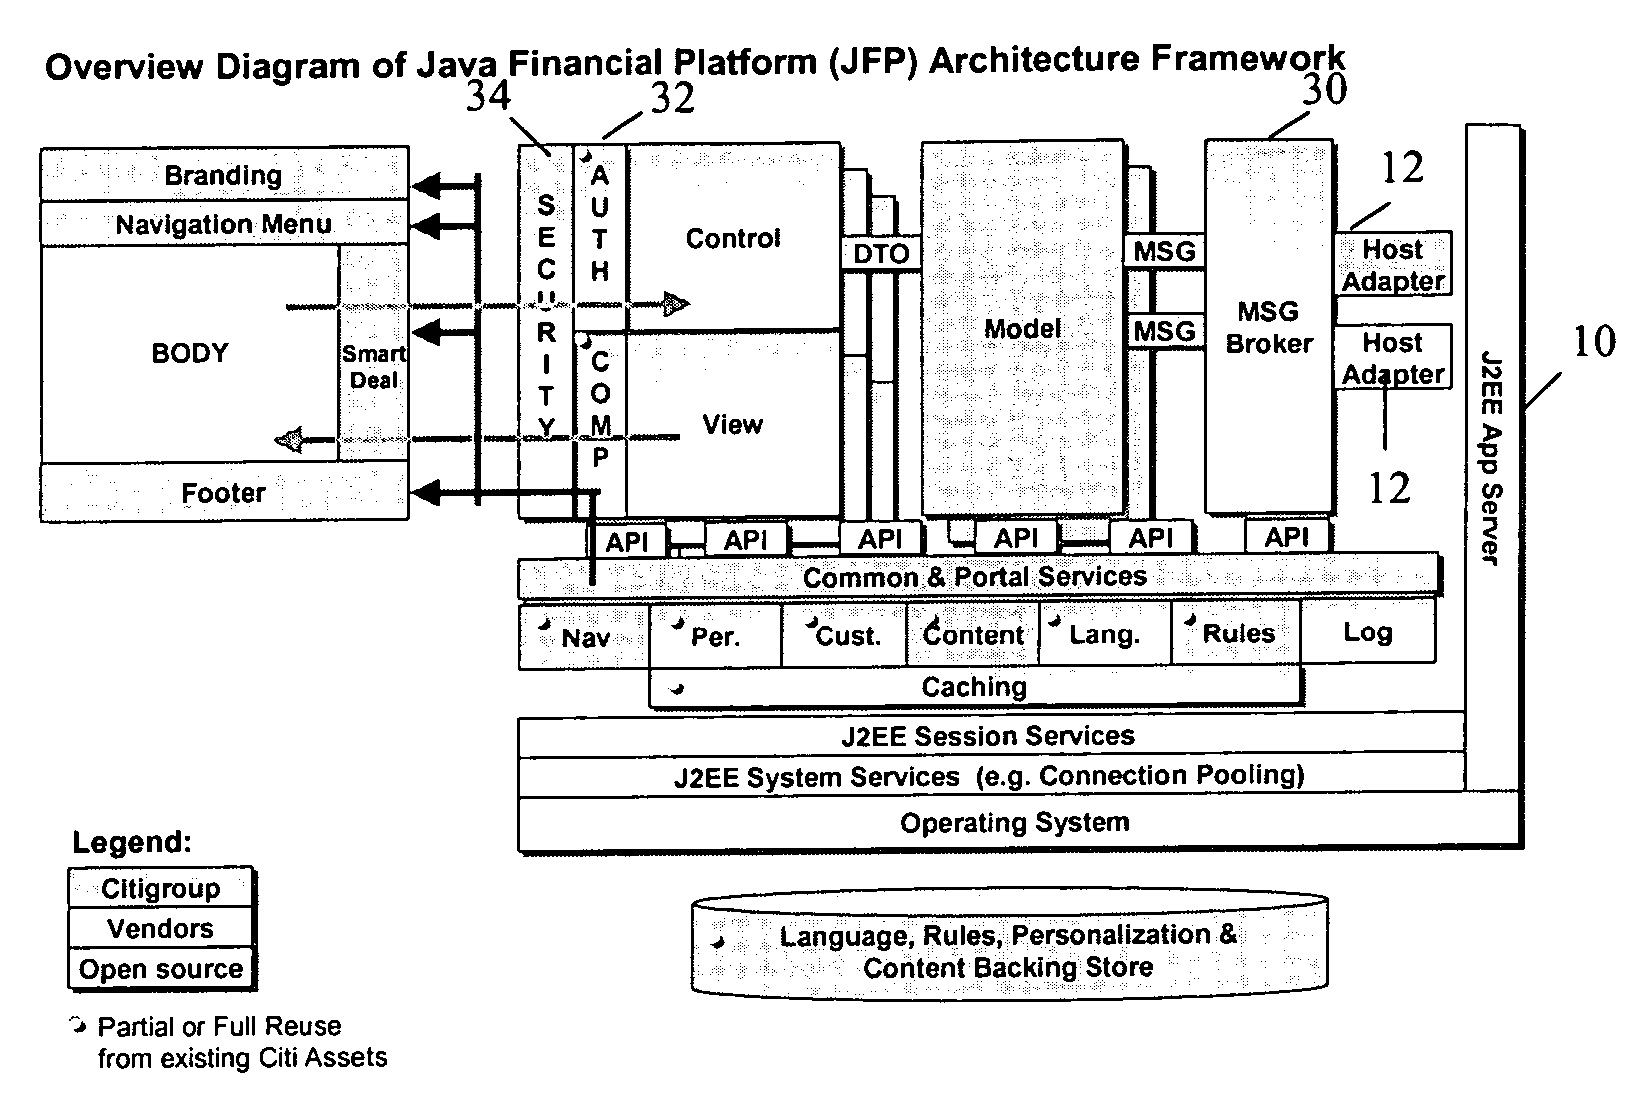 Methods and systems for implementing on-line financial institution services via a single platform